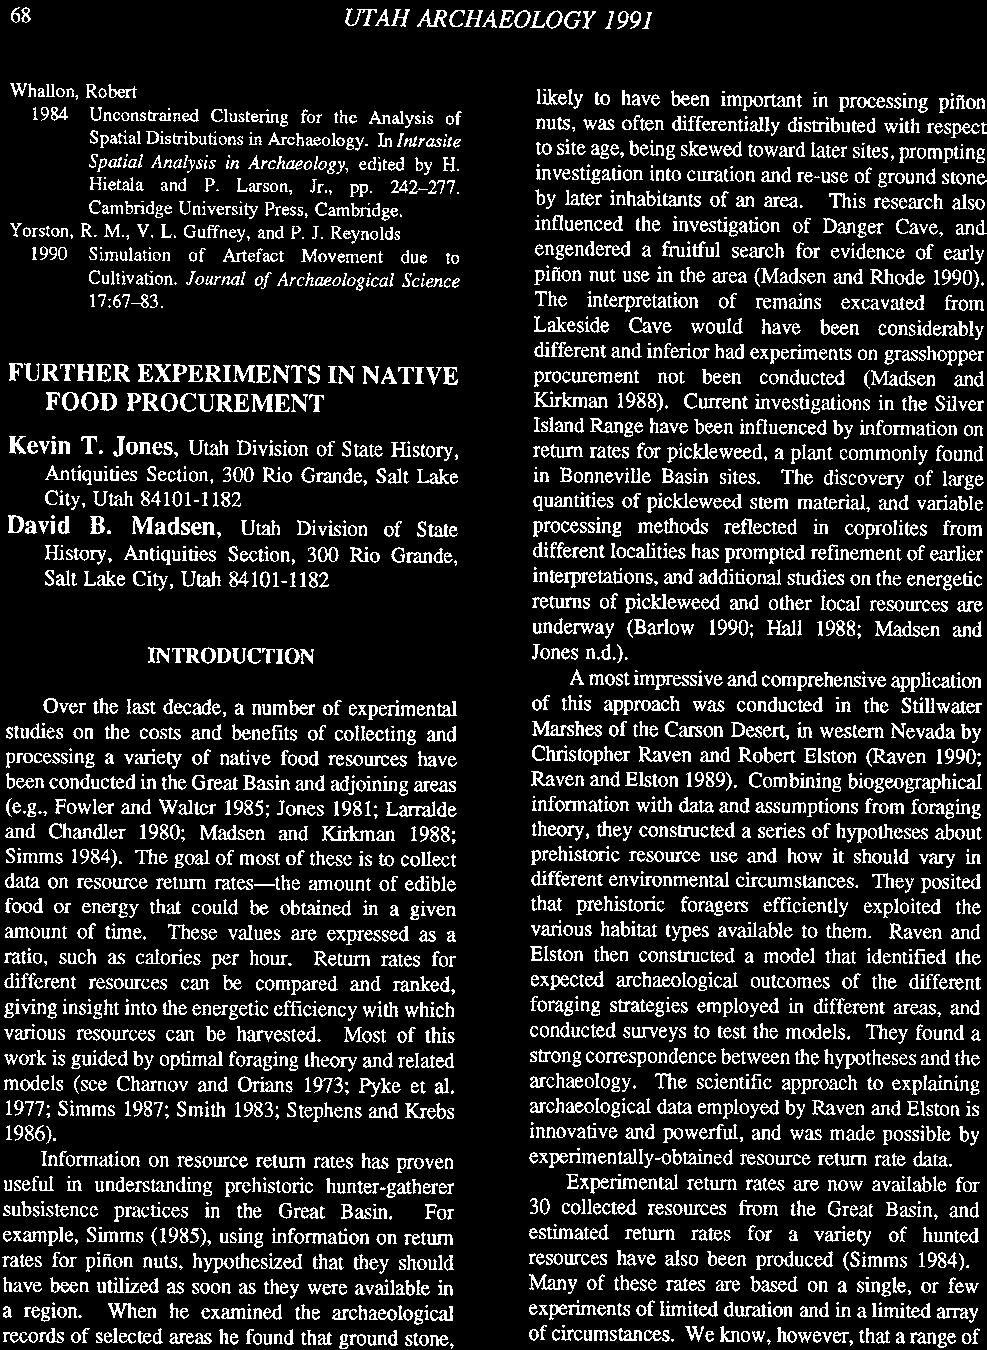 UTAH ARCHAEOLOGY 1991 Whallon, Robert 1984 Unconstrained Clustering for the Analysis of Spatial Distributions in Archaeology. In Iarasite Spalial Analysis in Archaeology, edited by H. Hietala and P.